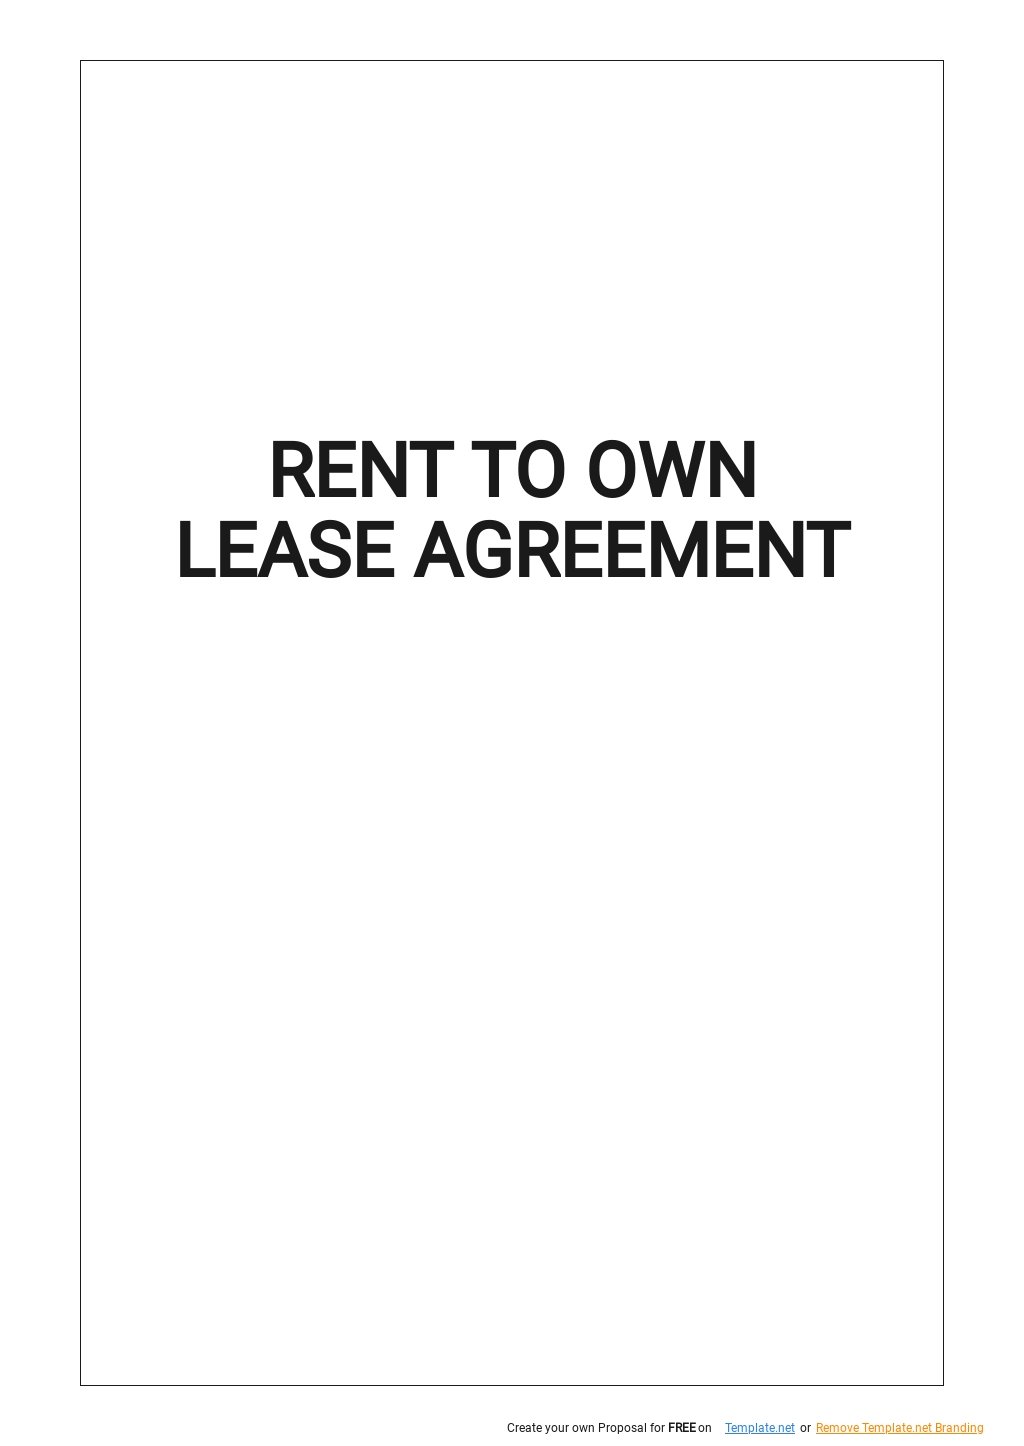 free-lease-agreement-template-leasing-agreement-pdf